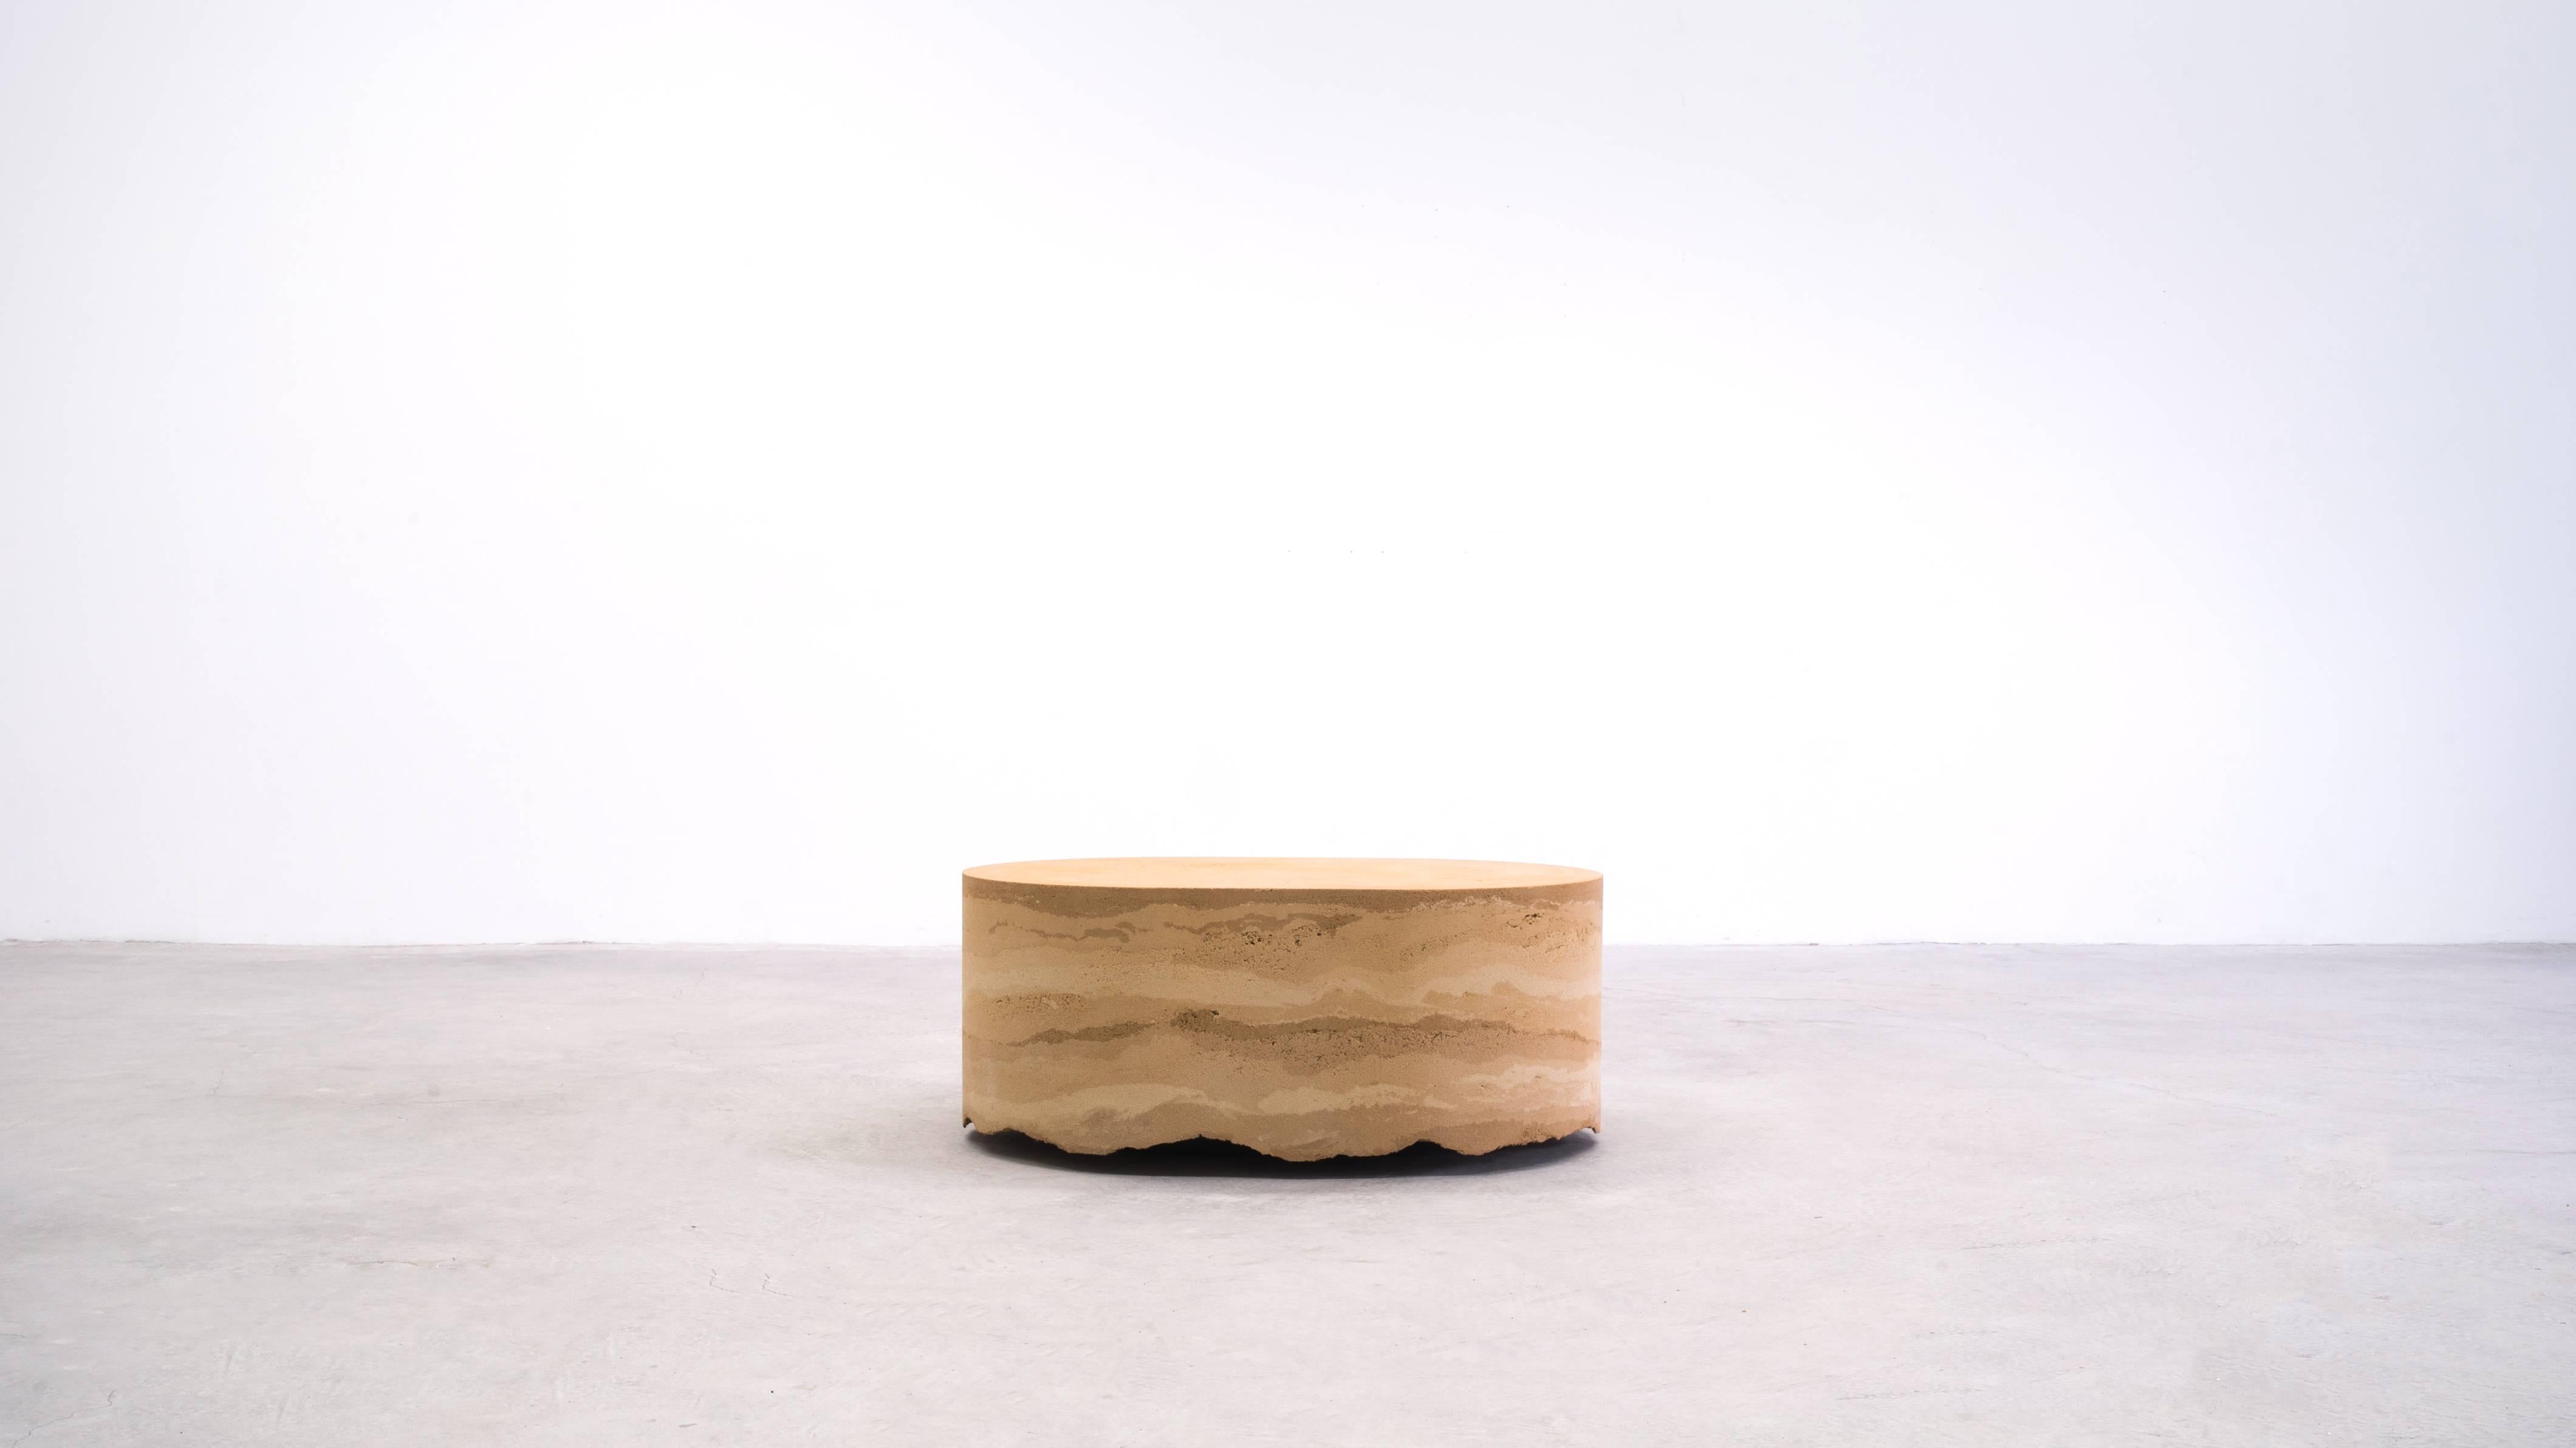 Composed in a language of landscape-oriented abstraction, the made-to-order coffee table is cast entirely from hand-dyed sand. The hand-dyed layers are stratified with delicate veins and ombre effects to create an organic piece to emulate a desert